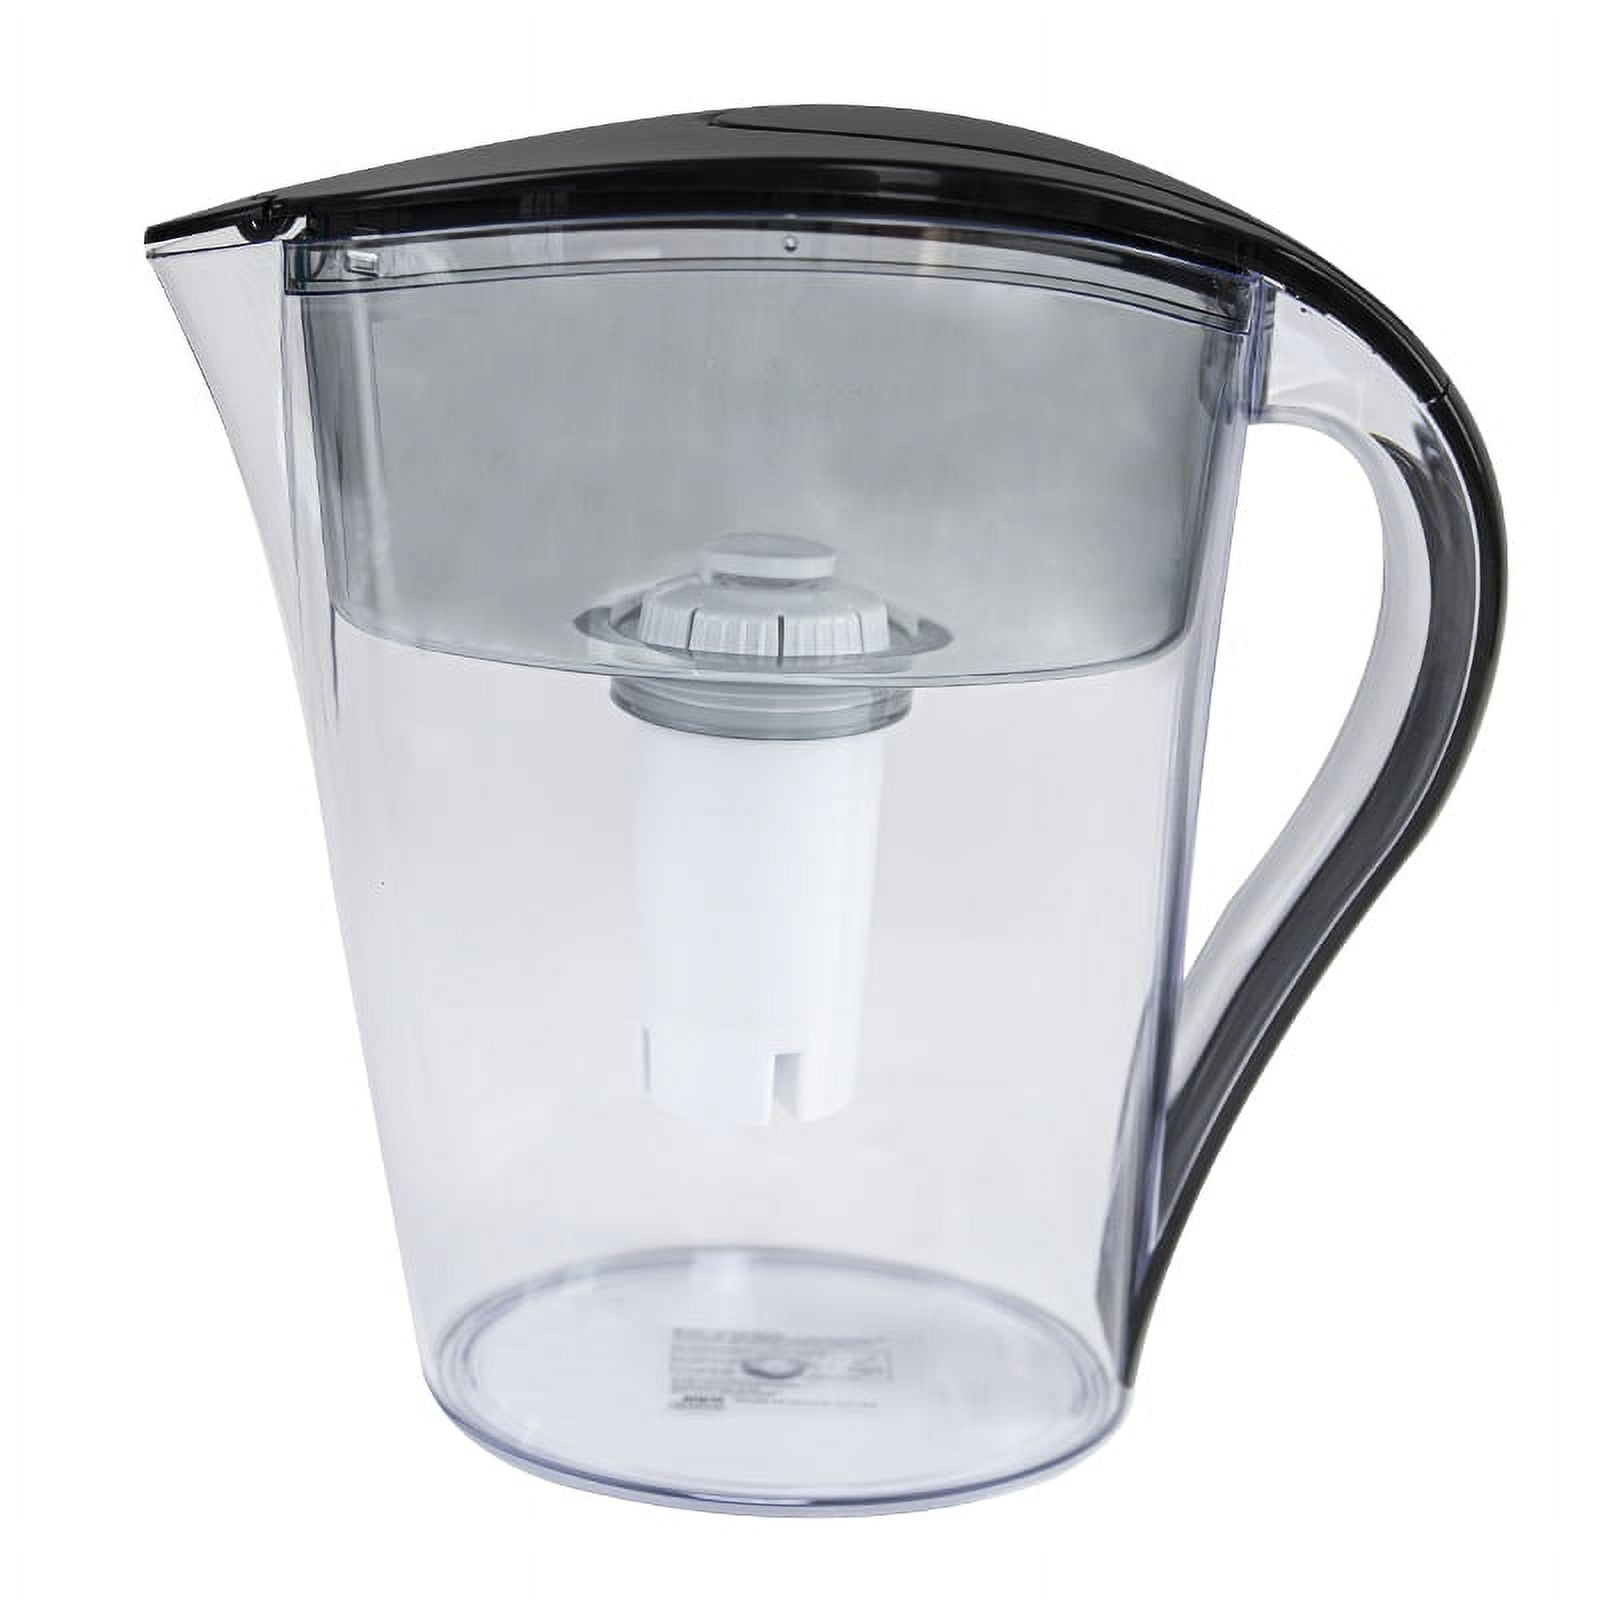 Great Value 10-Cup Water Filter Pitcher Series, Black Color, BPA-Free, Brita  Filter Compatible, Assembled Product Dimensions: 10.8 Length, 10.6  Height, 3.9 Width 